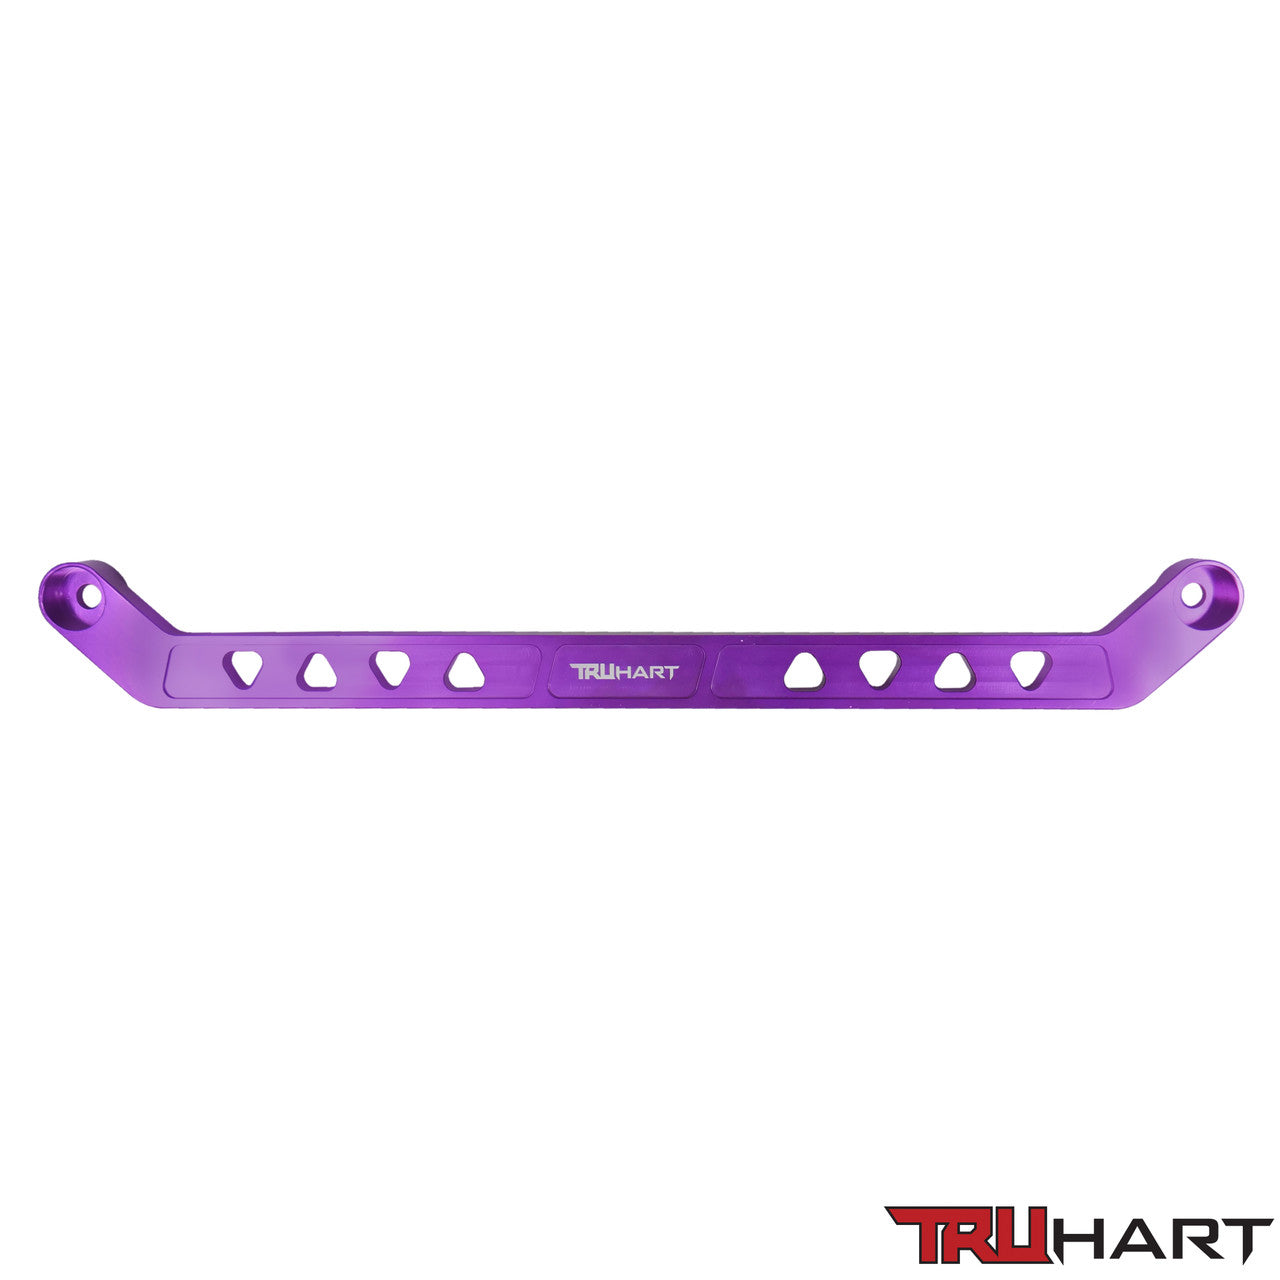 TruHart - Rear Tie Bar for 96-00 Civic